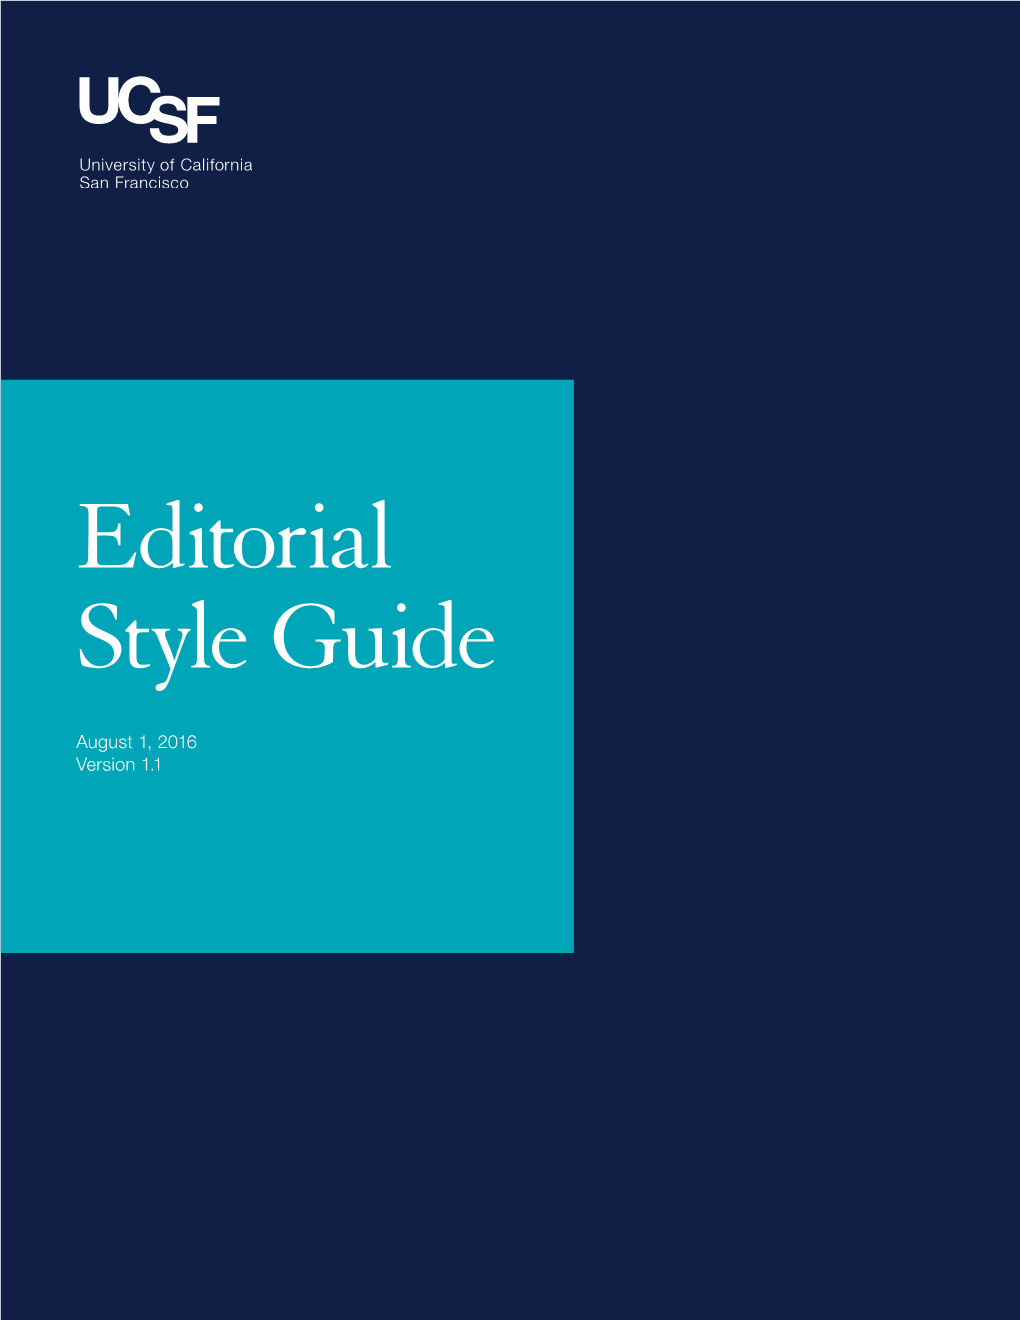 The UCSF Editorial Style Guide